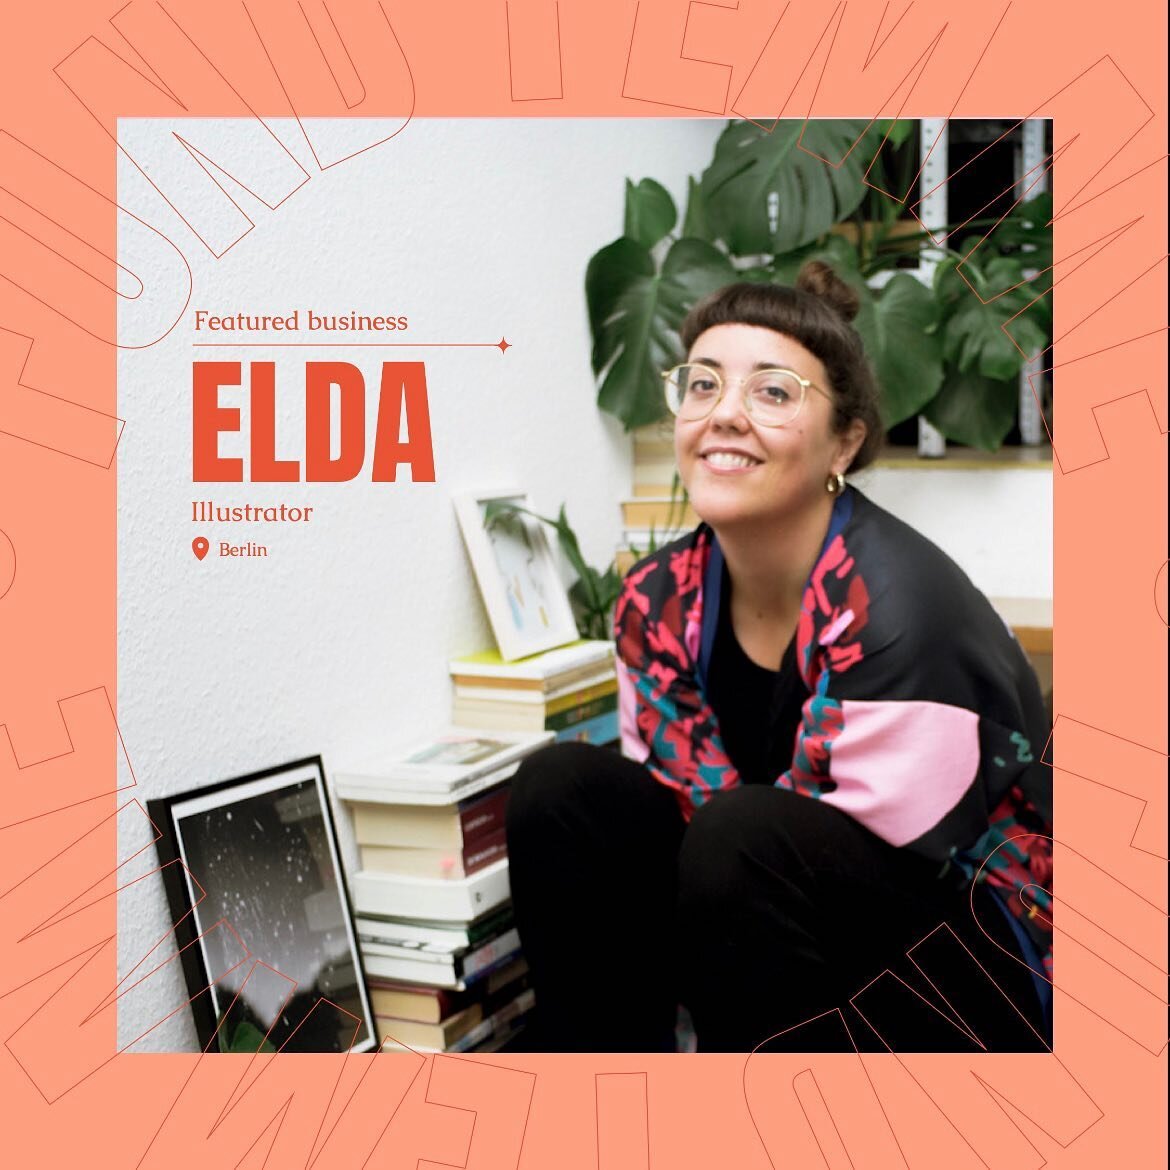 Meet Elda Broglio. She is the kick ass illustrator who helped us imagine and encapsulate what it means to be a powerful women in business. Her visual storytelling reflects the world we want to see!